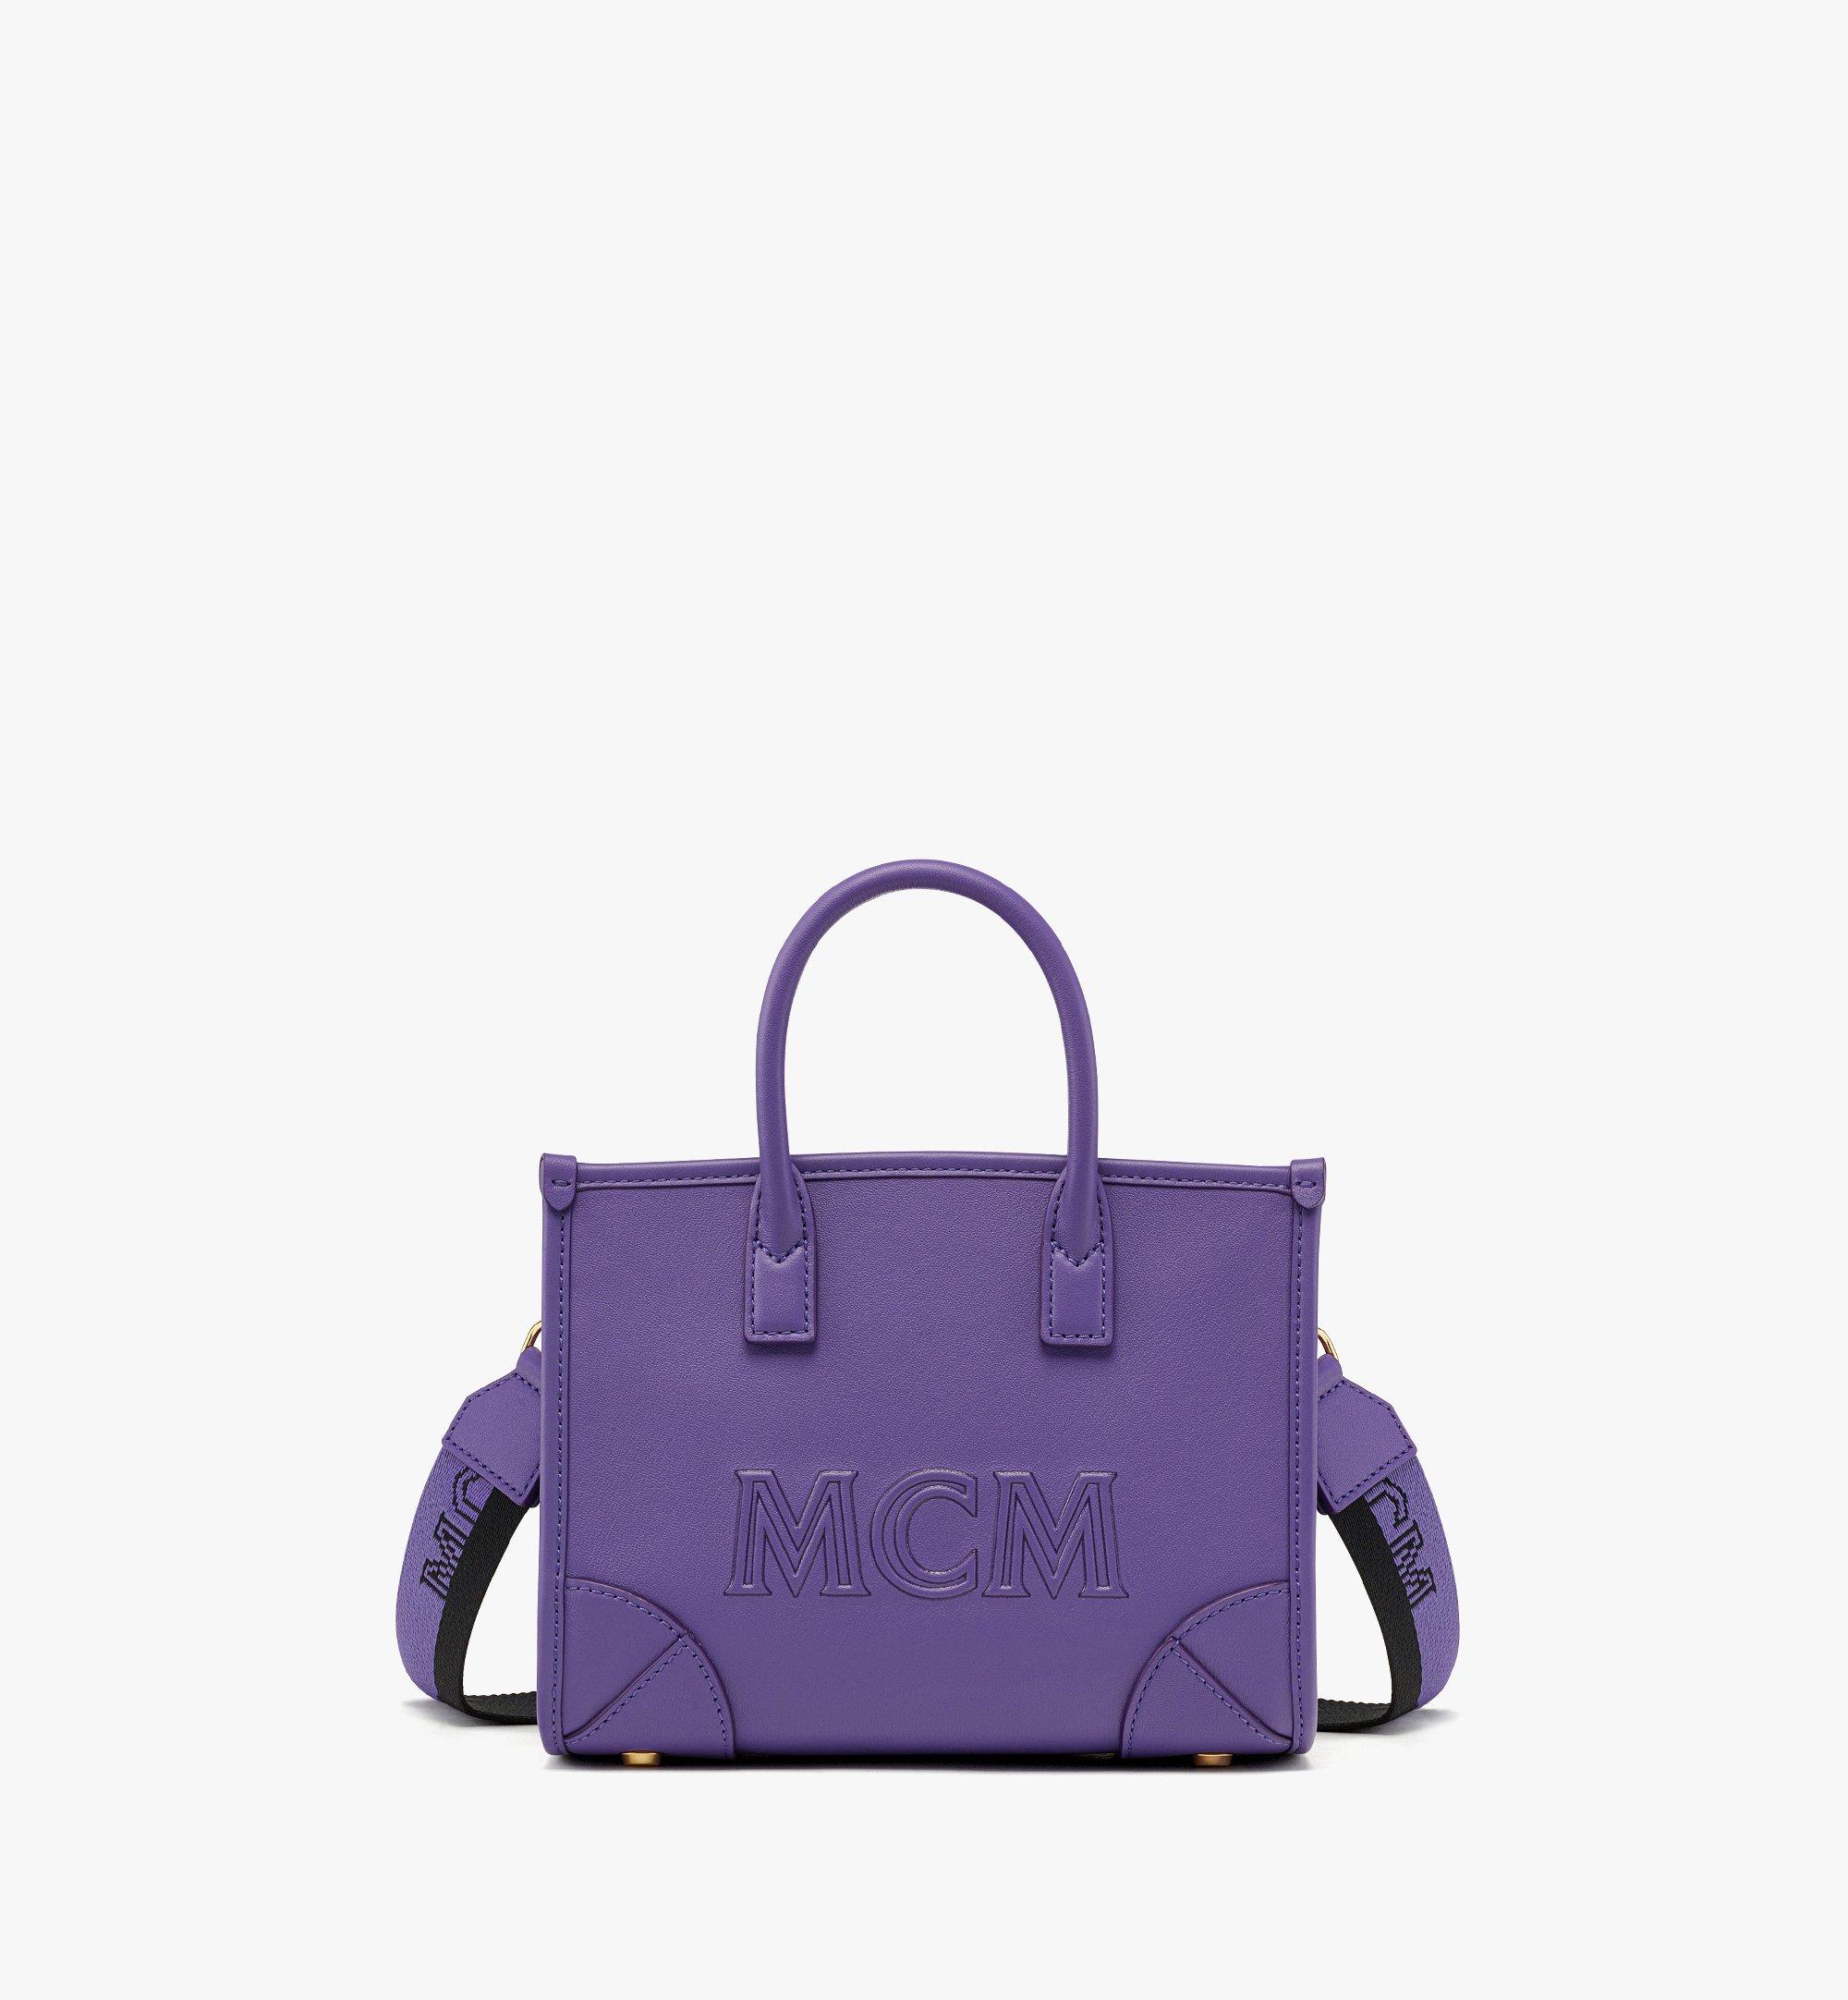 Tote Luxury Designer By Mcm Size: Large